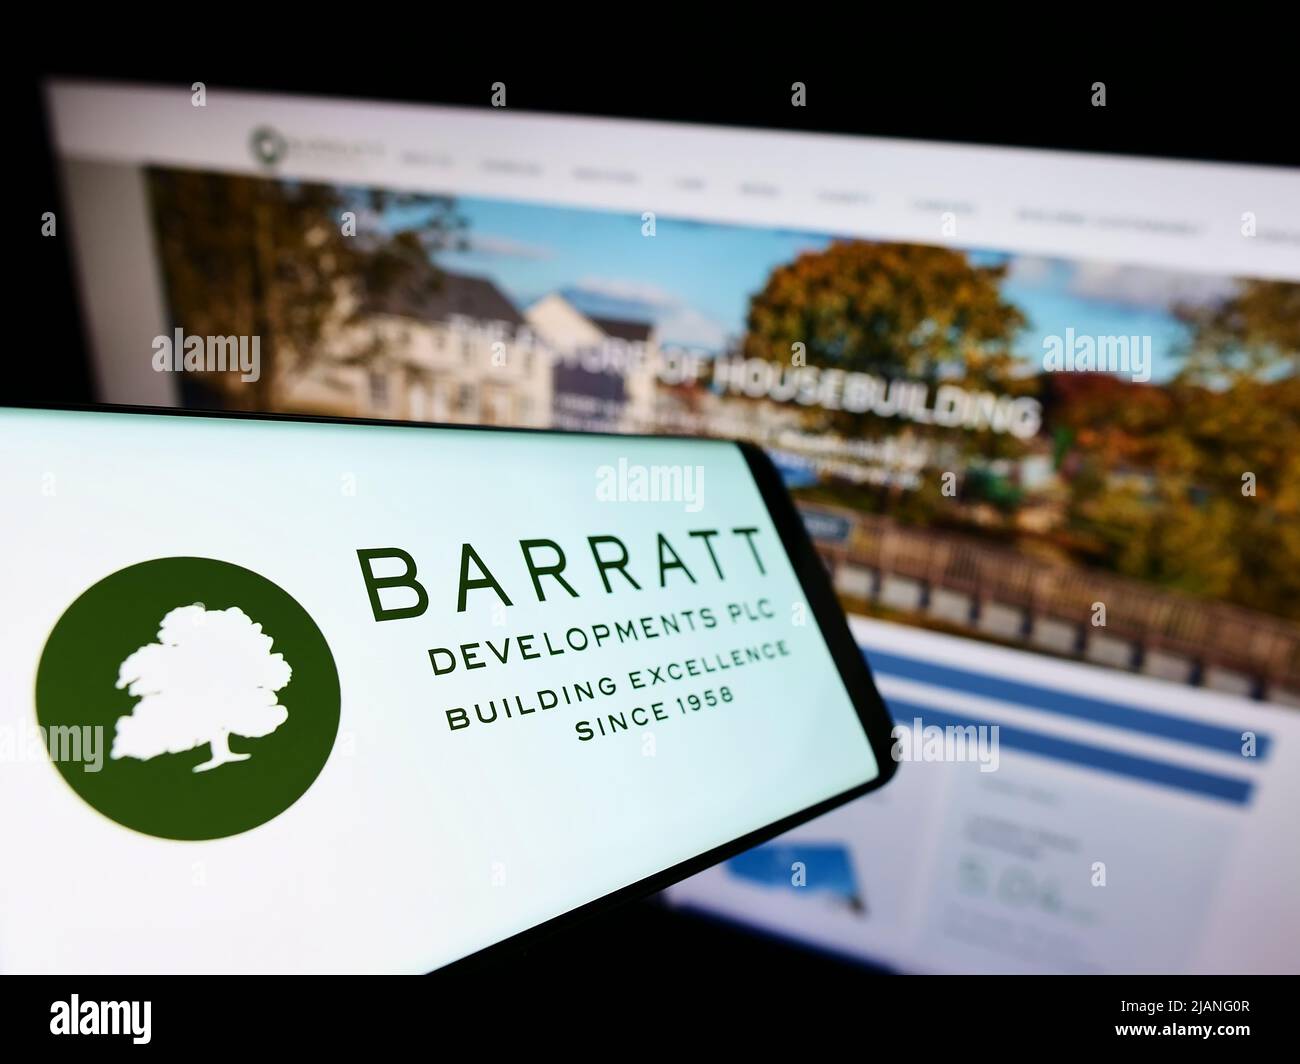 Mobile phone with logo of property company Barratt Developments plc on screen in front of business website. Focus on center-left of phone display. Stock Photo